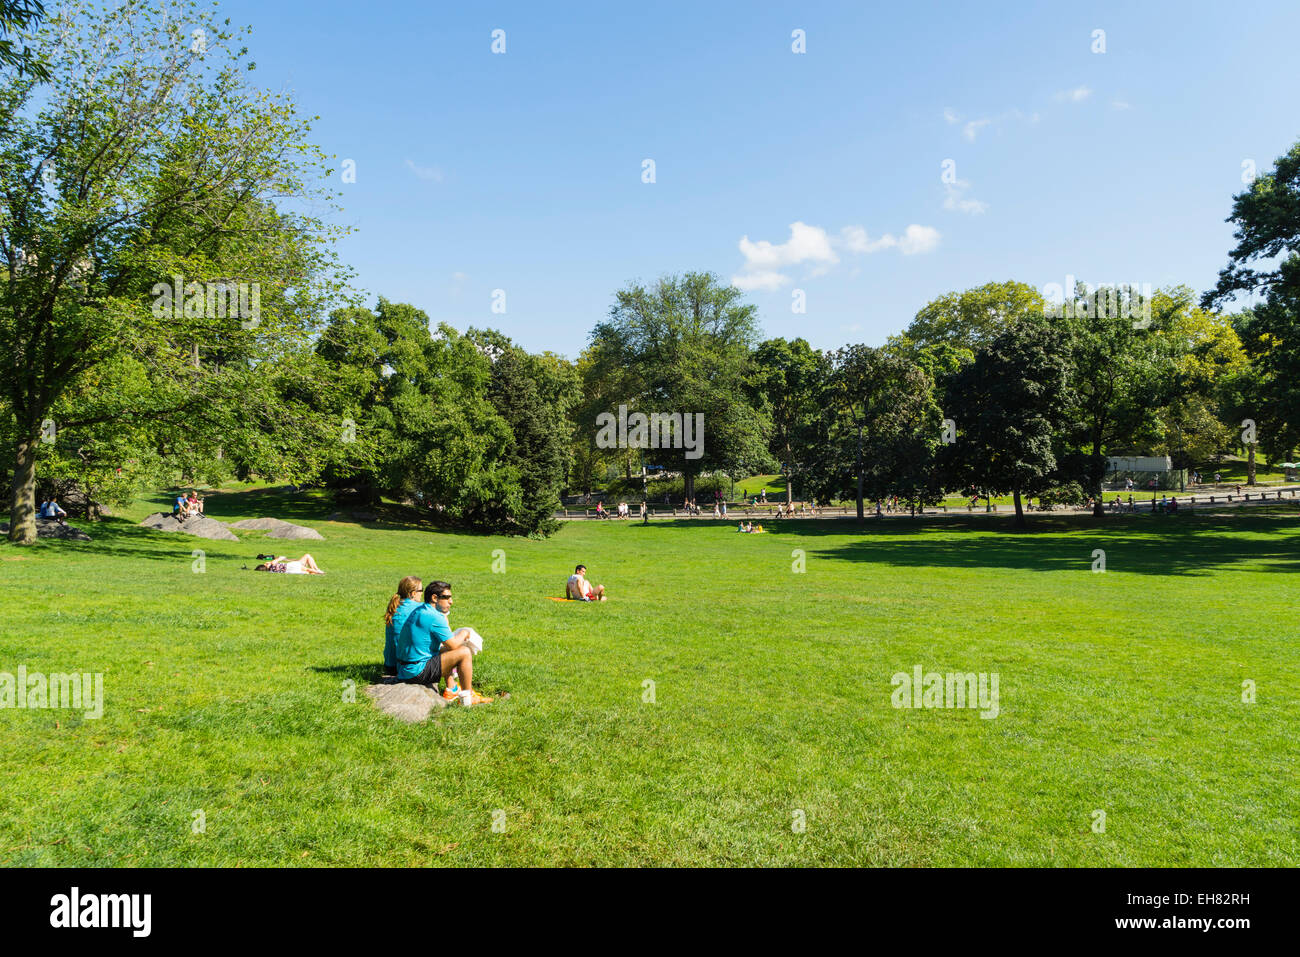 Sheep Meadow, Central Park, Manhattan, New York City, New York, United States of America, North America Stock Photo